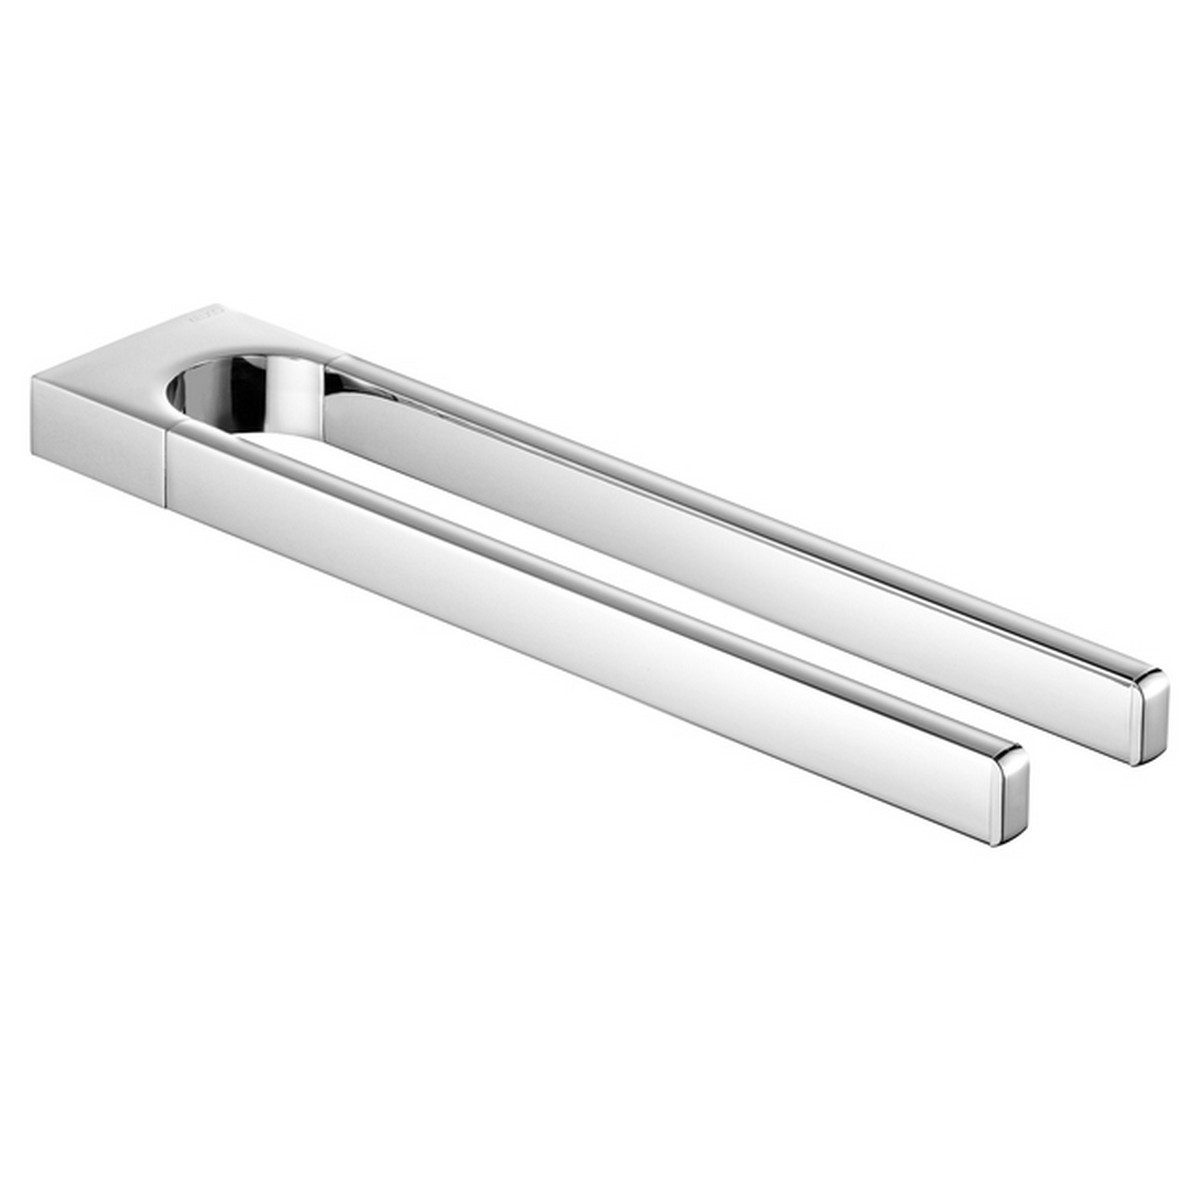 KEUCO 12719010000 MOLL 13 3/8 INCH WALL MOUNTED DOUBLE TOWEL HOLDER IN POLISHED CHROME